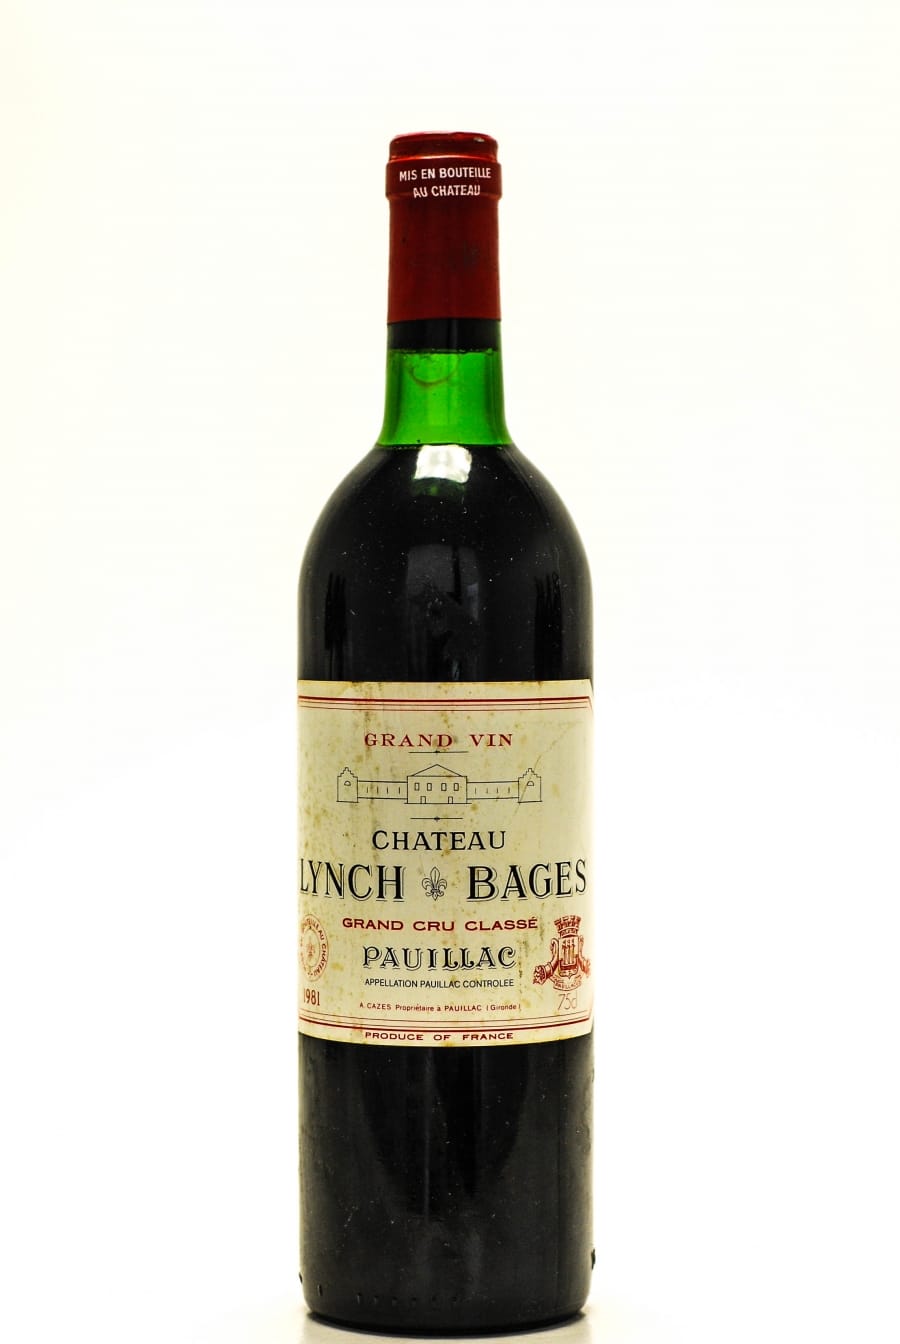 Chateau Lynch Bages - Chateau Lynch Bages 1981 Perfect